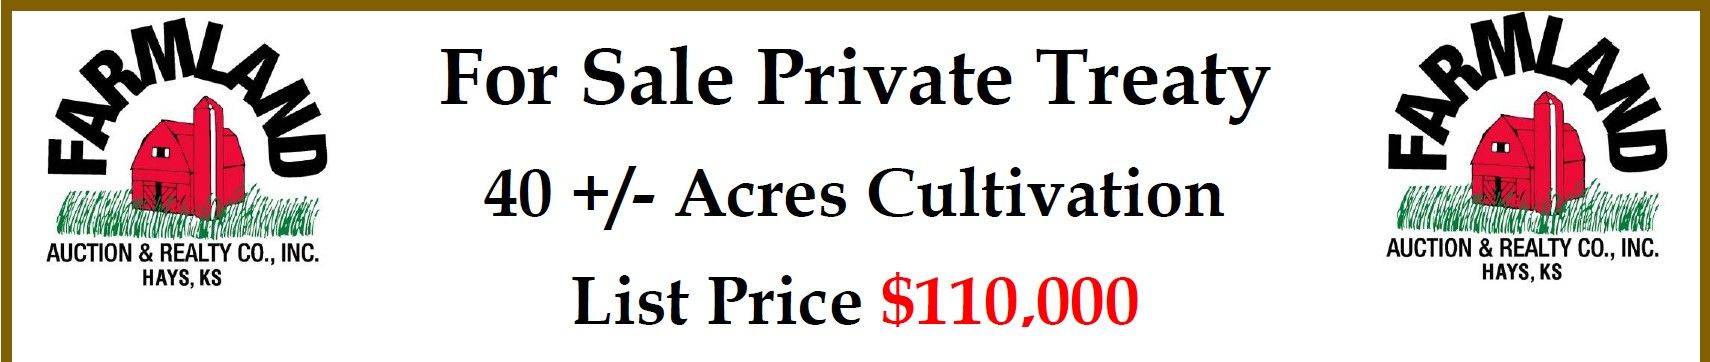 *SOLD* 40 +/- Acres of Cultivation